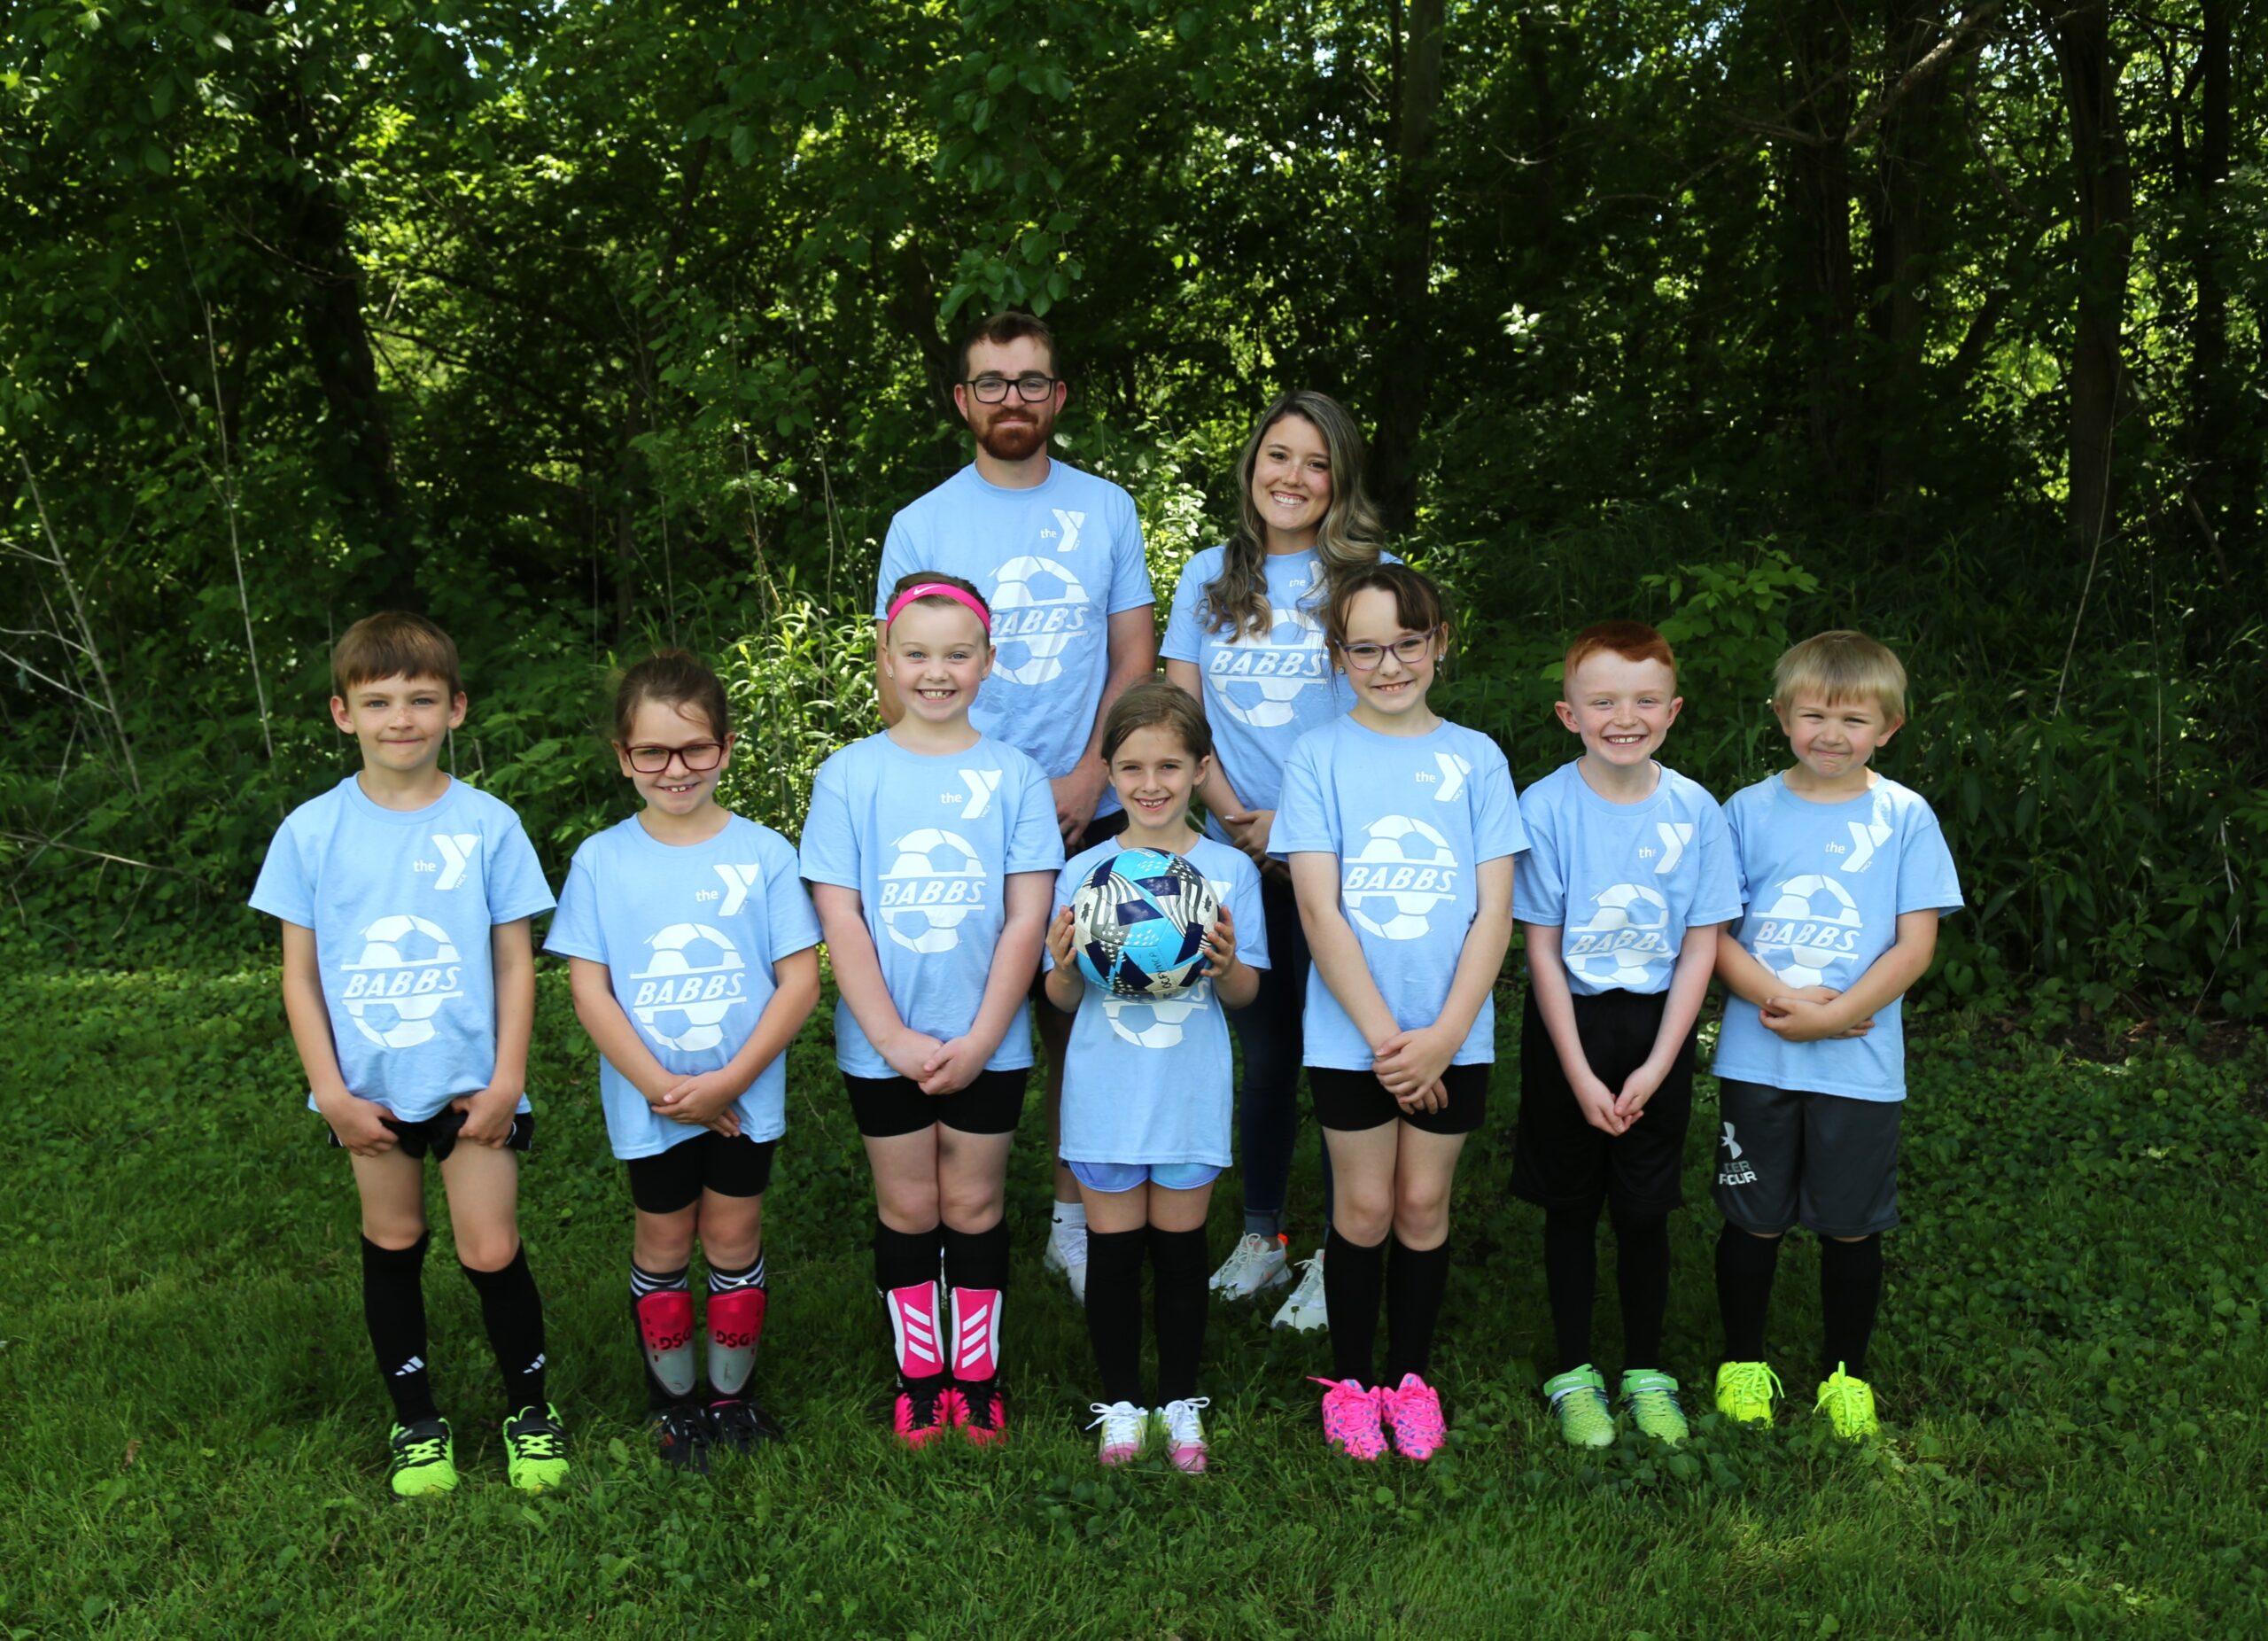 Babbs Supermarket youth soccer team group photo